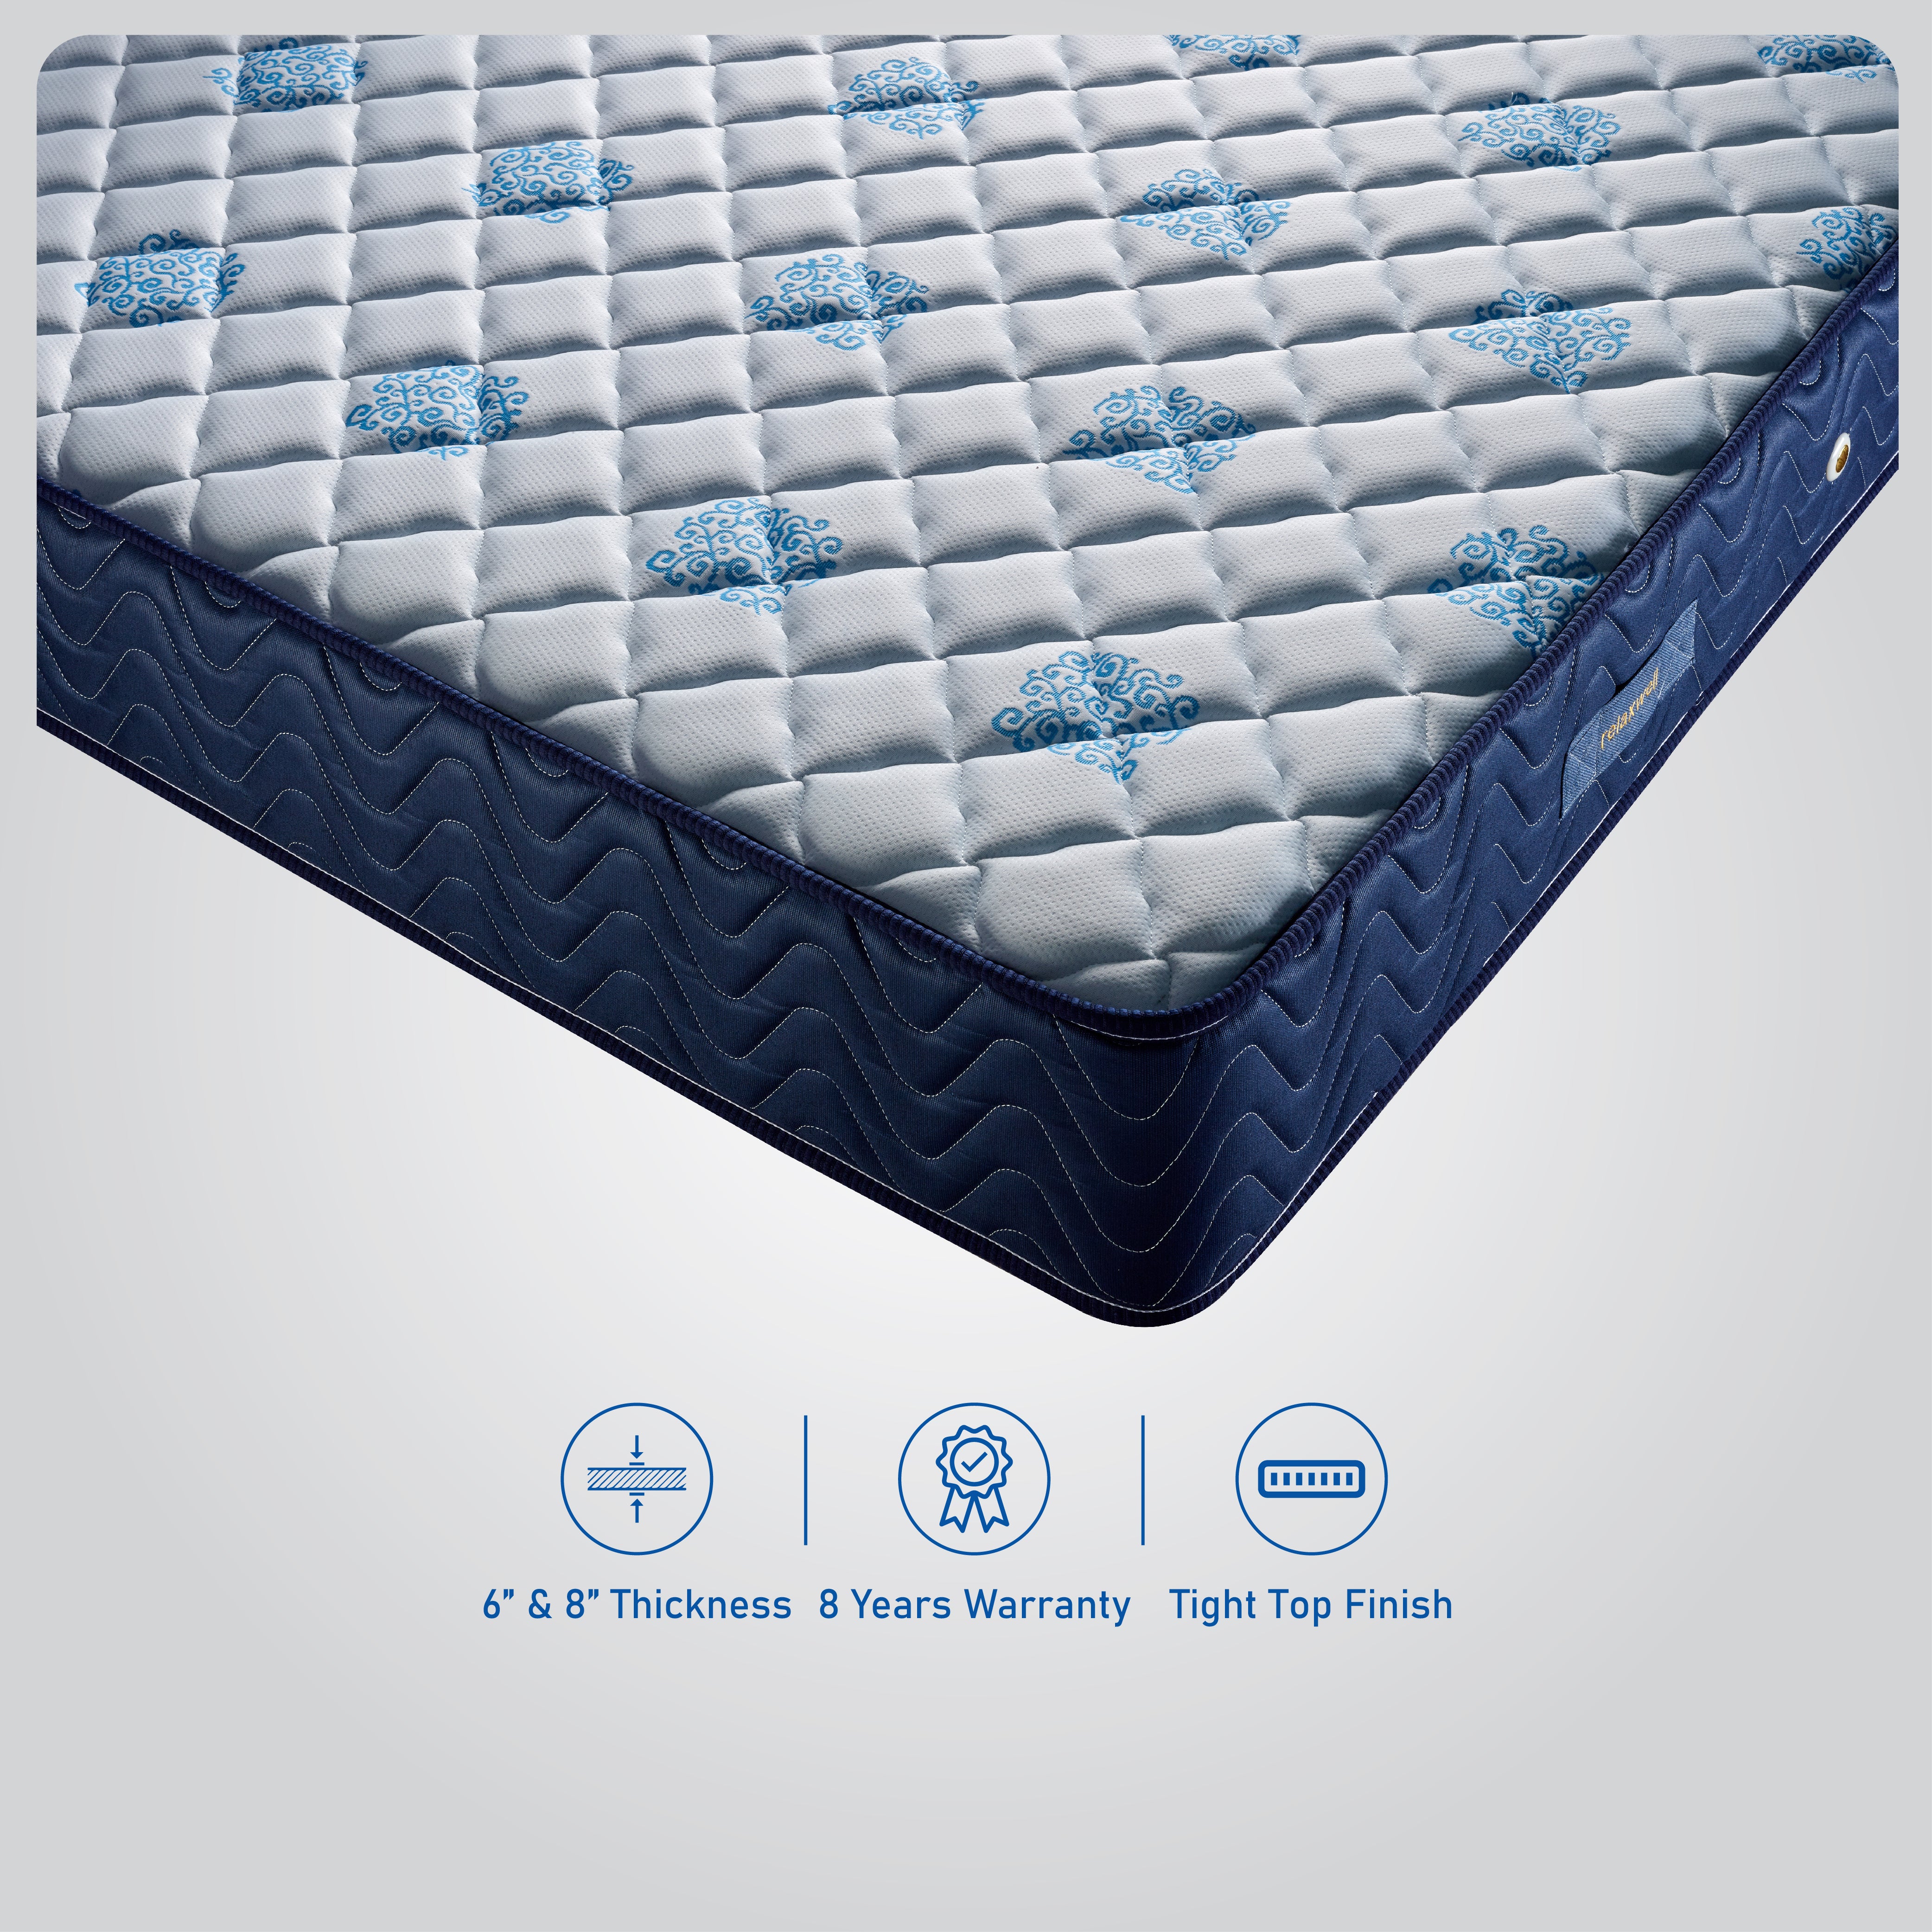 Buy Comfort Pocketed Spring Mattress In India